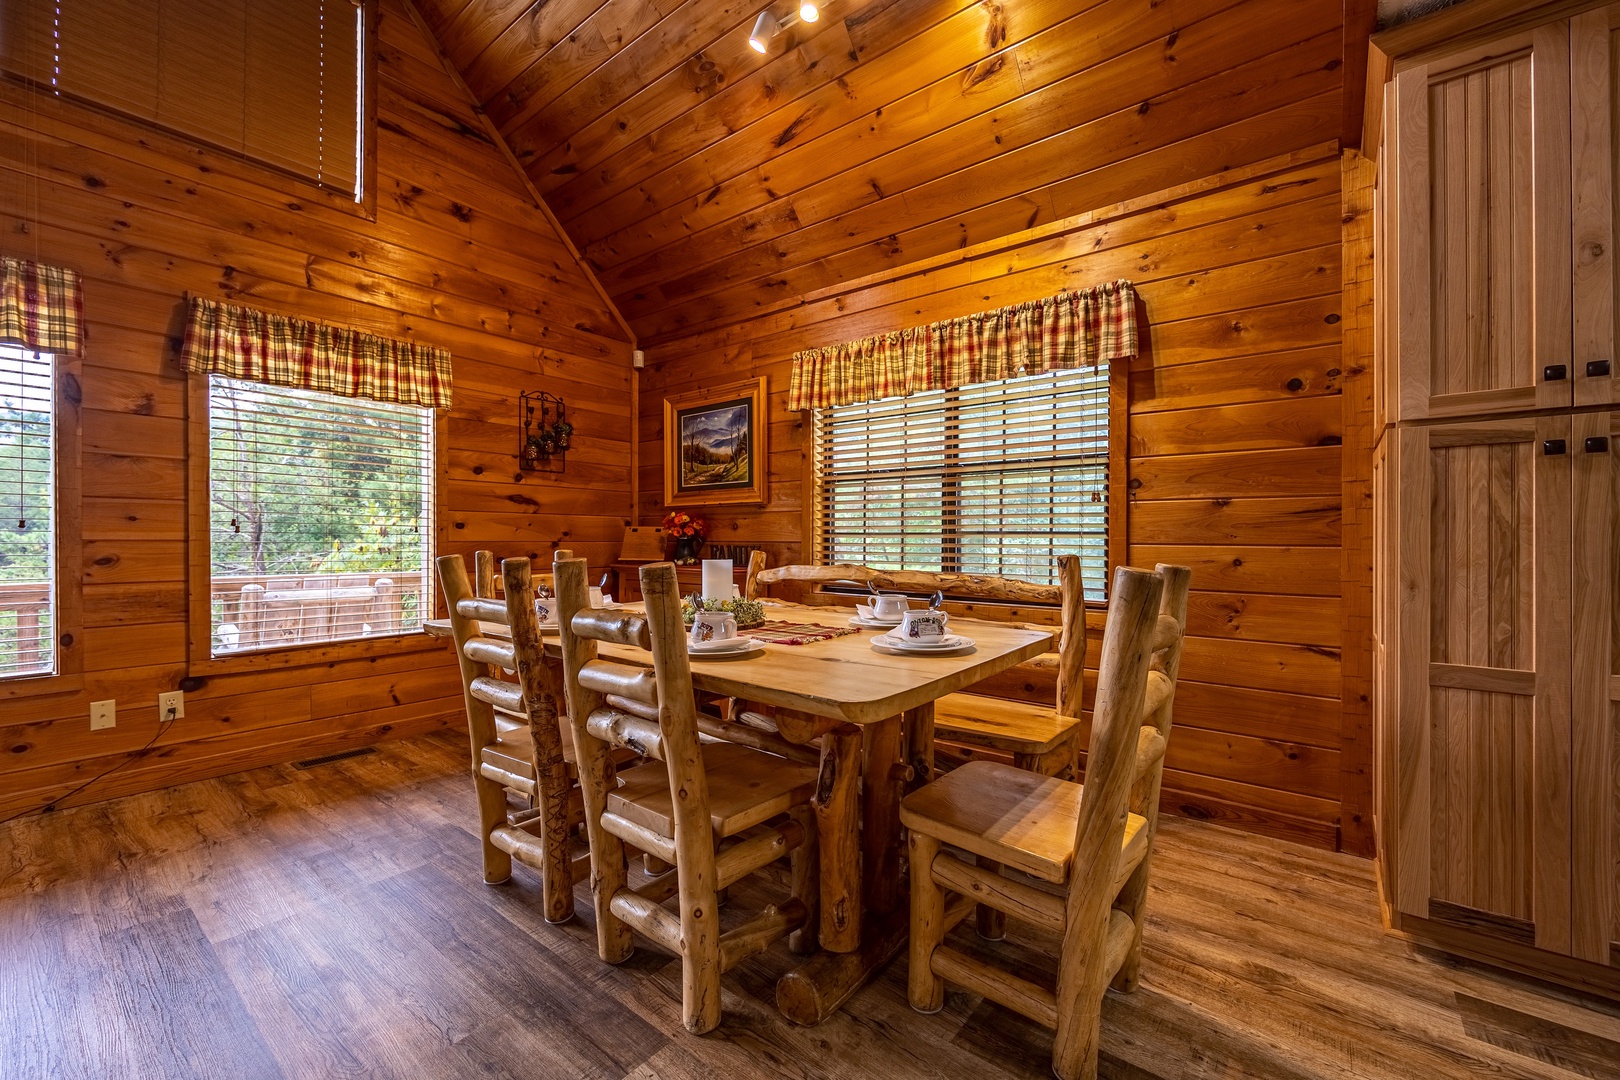 Dining room seating for 6 at Cabin On The Hill, a 1 bedroom cabin rental located in Pigeon Forge